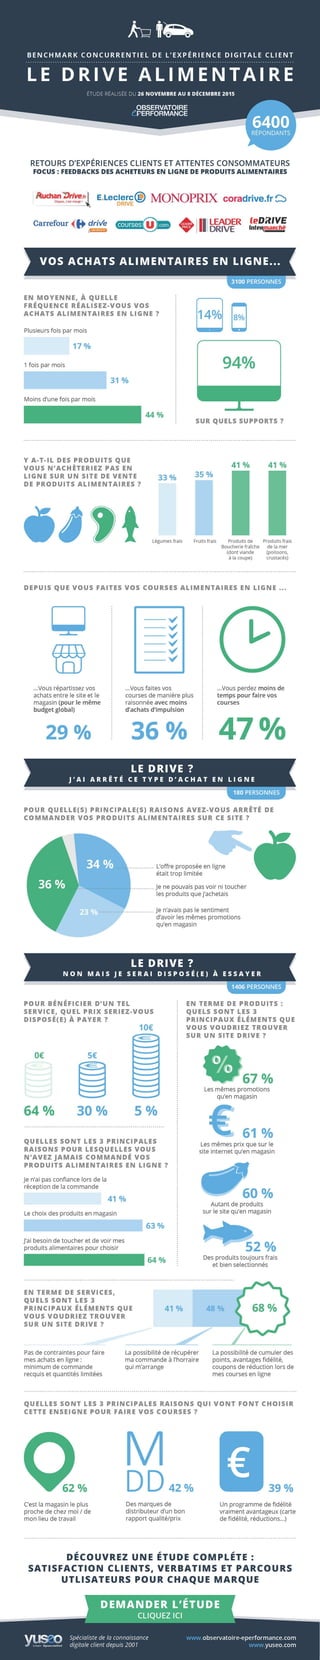 Infographie Yuseo - Observatoire e-performance Drive alimentaire 2015